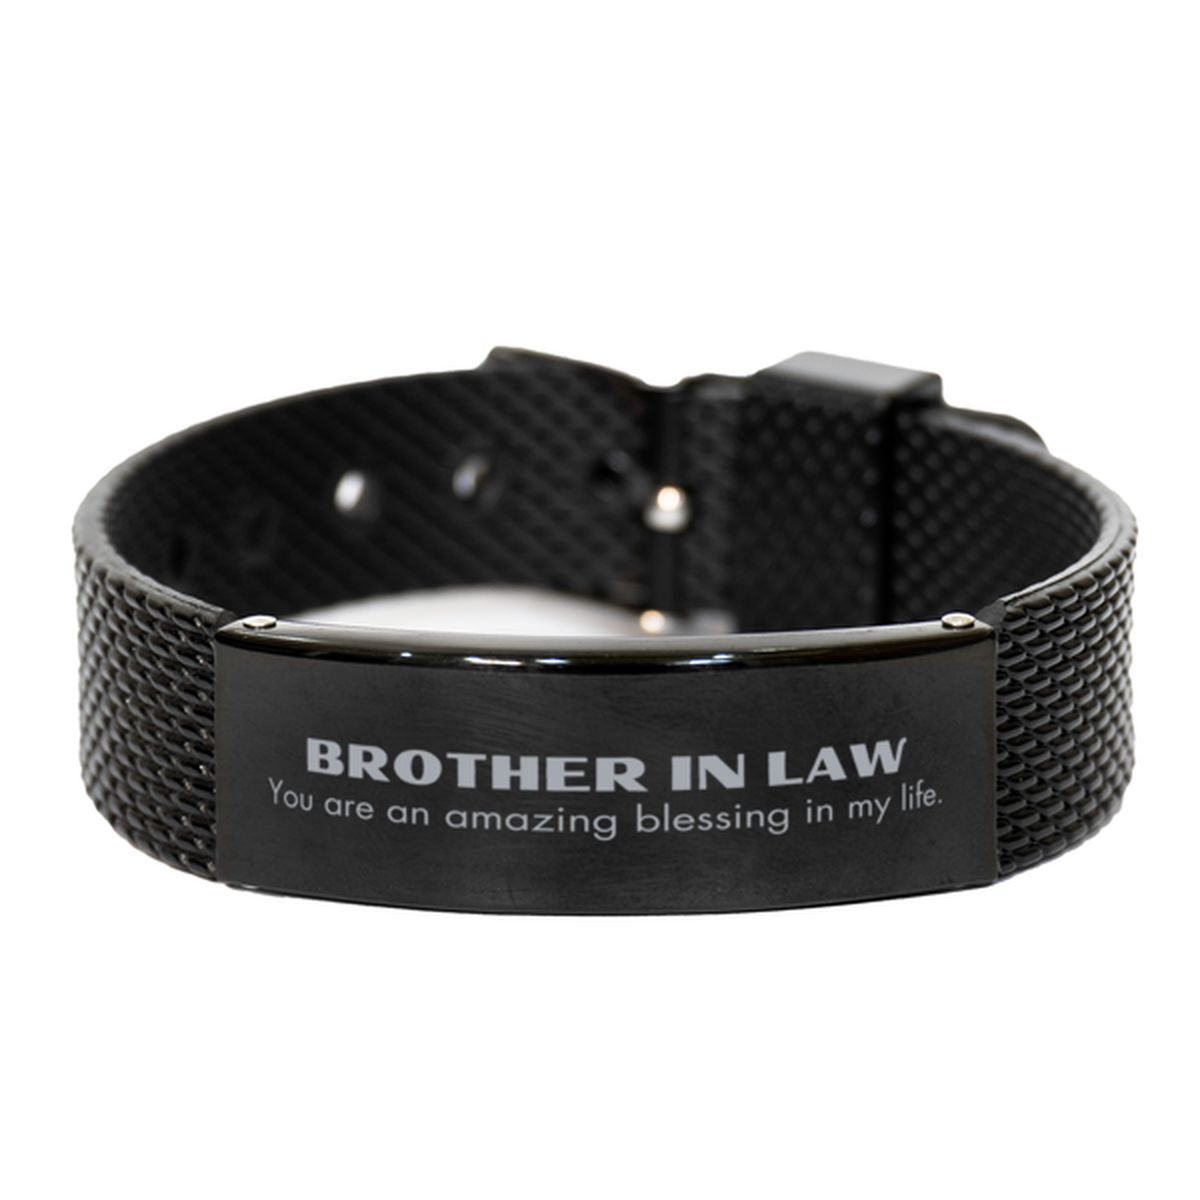 Brother In Law Black Shark Mesh Bracelet, You are an amazing blessing in my life, Thank You Gifts For Brother In Law, Inspirational Birthday Christmas Unique Gifts For Brother In Law